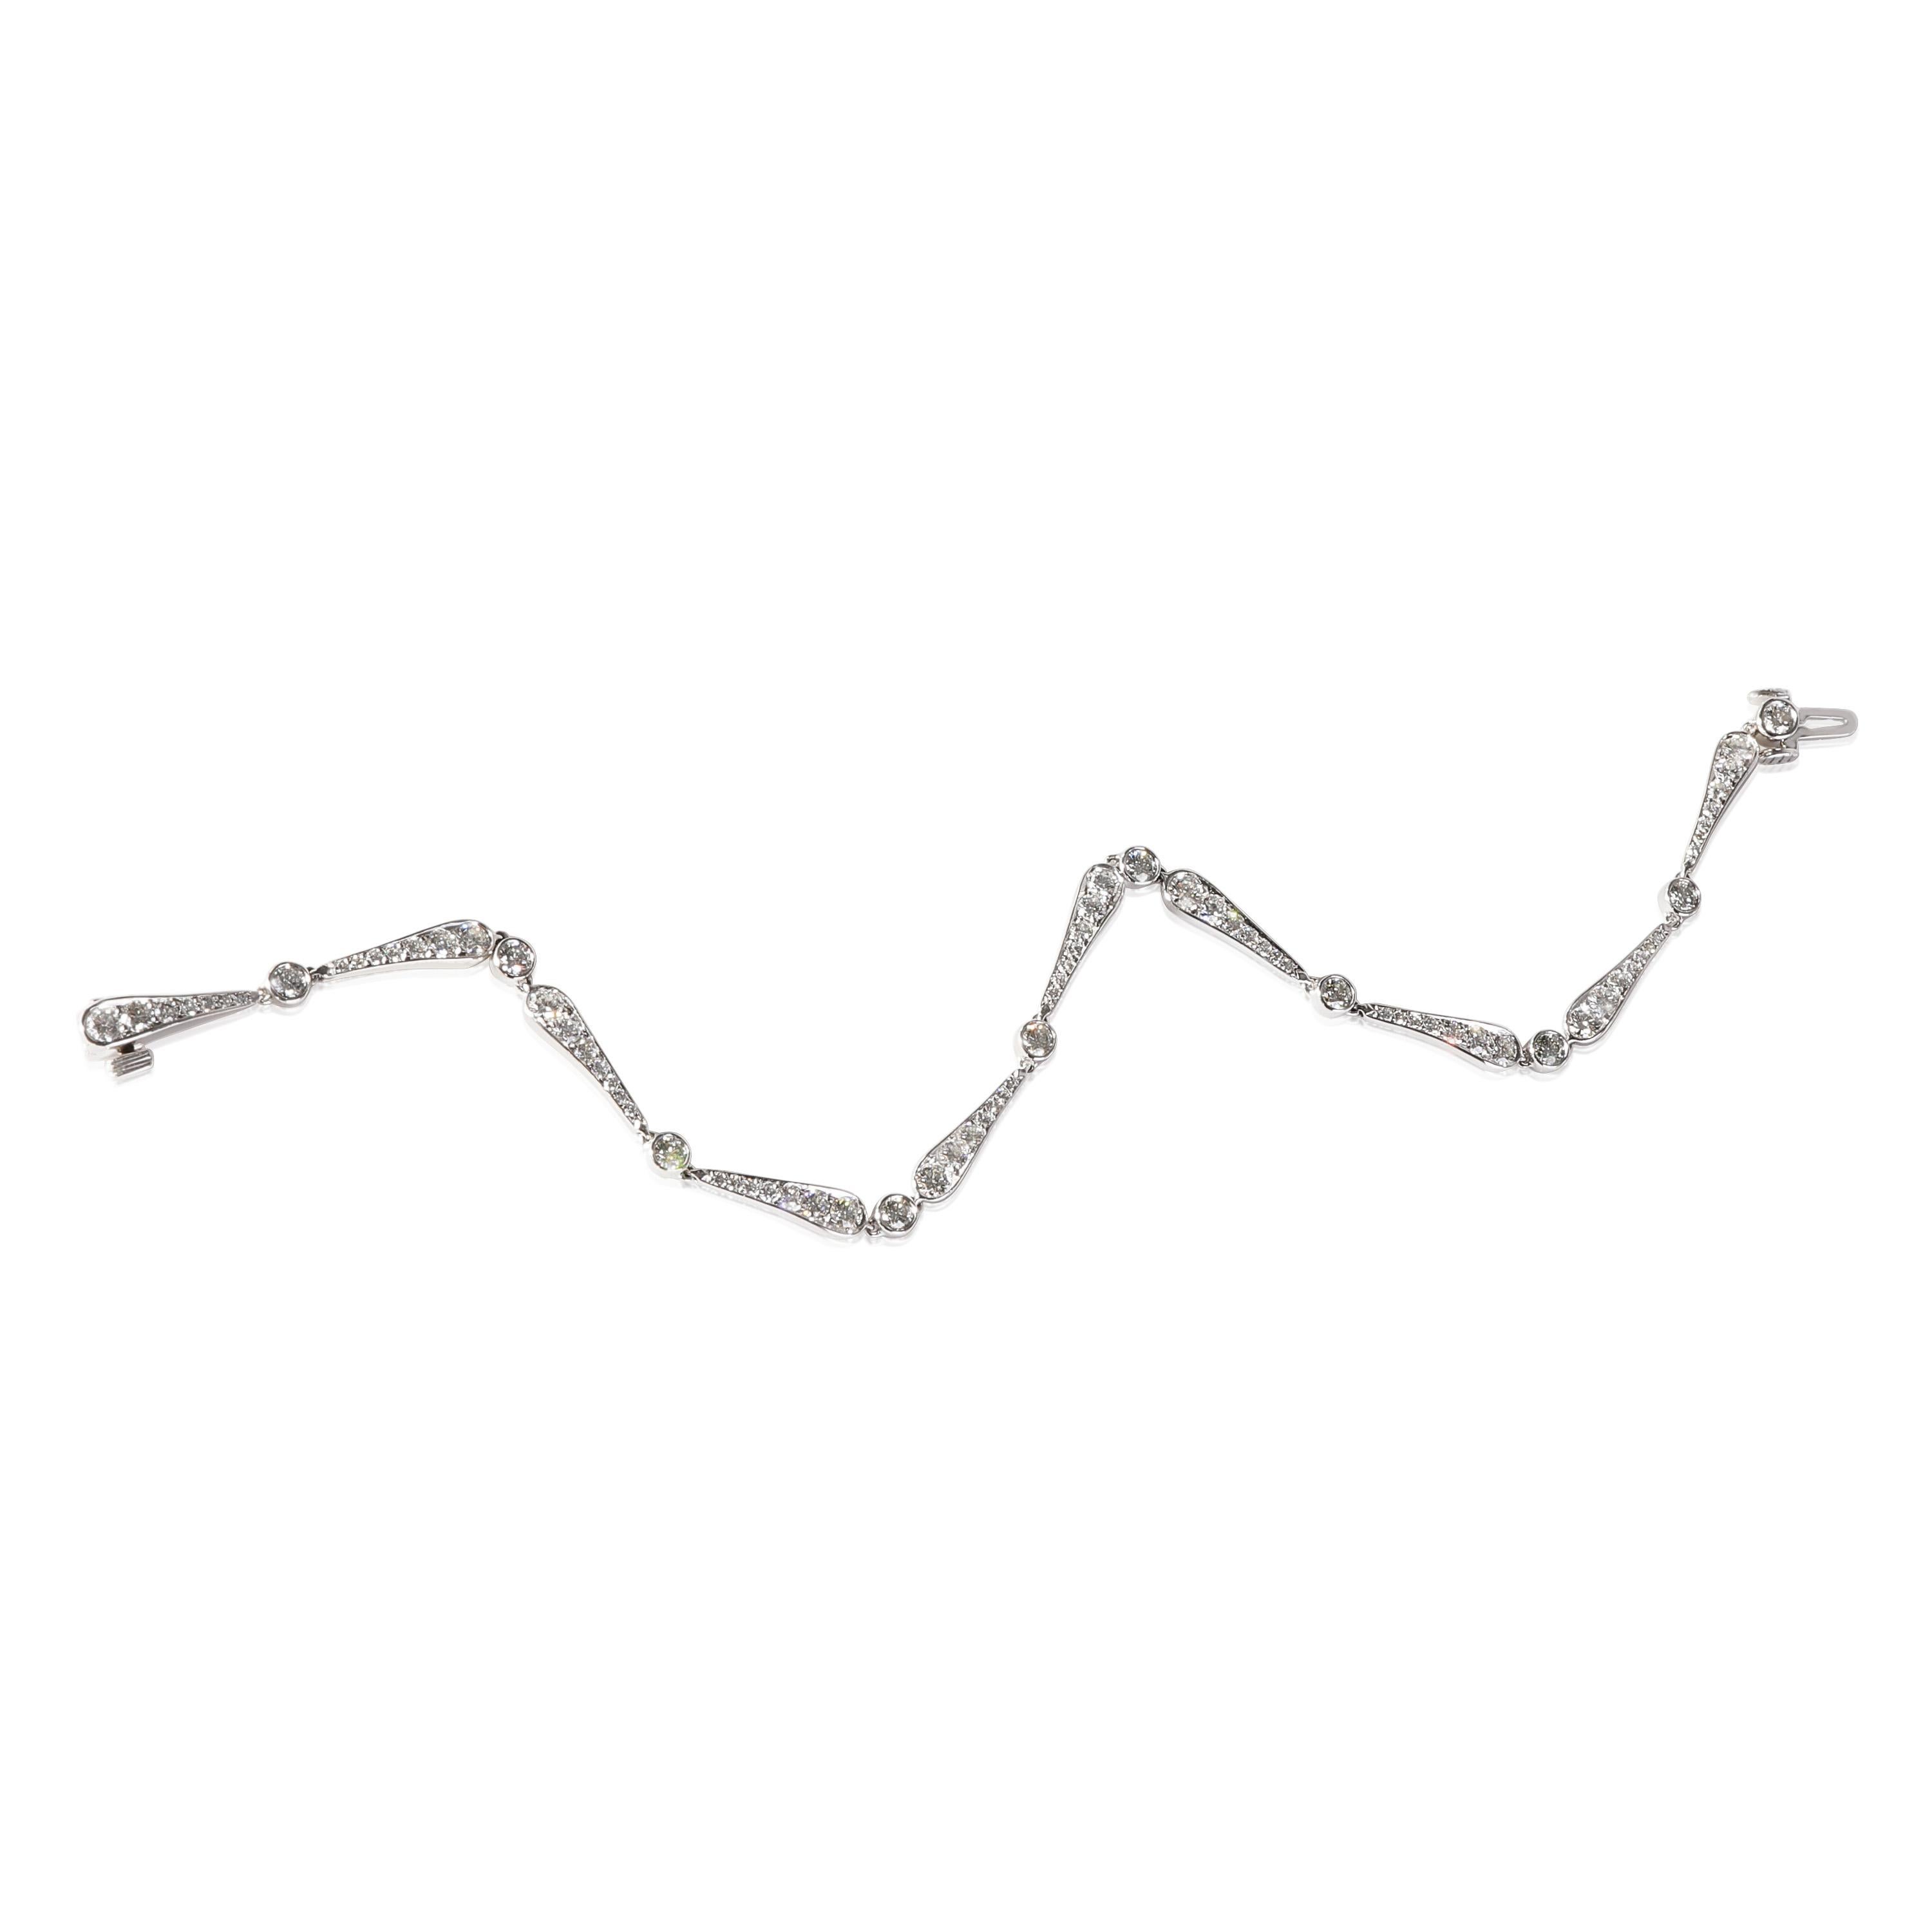 Tiffany & Co. Jazz Diamond Bracelet in Platinum 1.70 CTW

PRIMARY DETAILS
SKU: 118689
Listing Title: Tiffany & Co. Jazz Diamond Bracelet in Platinum 1.70 CTW
Condition Description: Retails for 9300 USD. In excellent condition and recently polished.